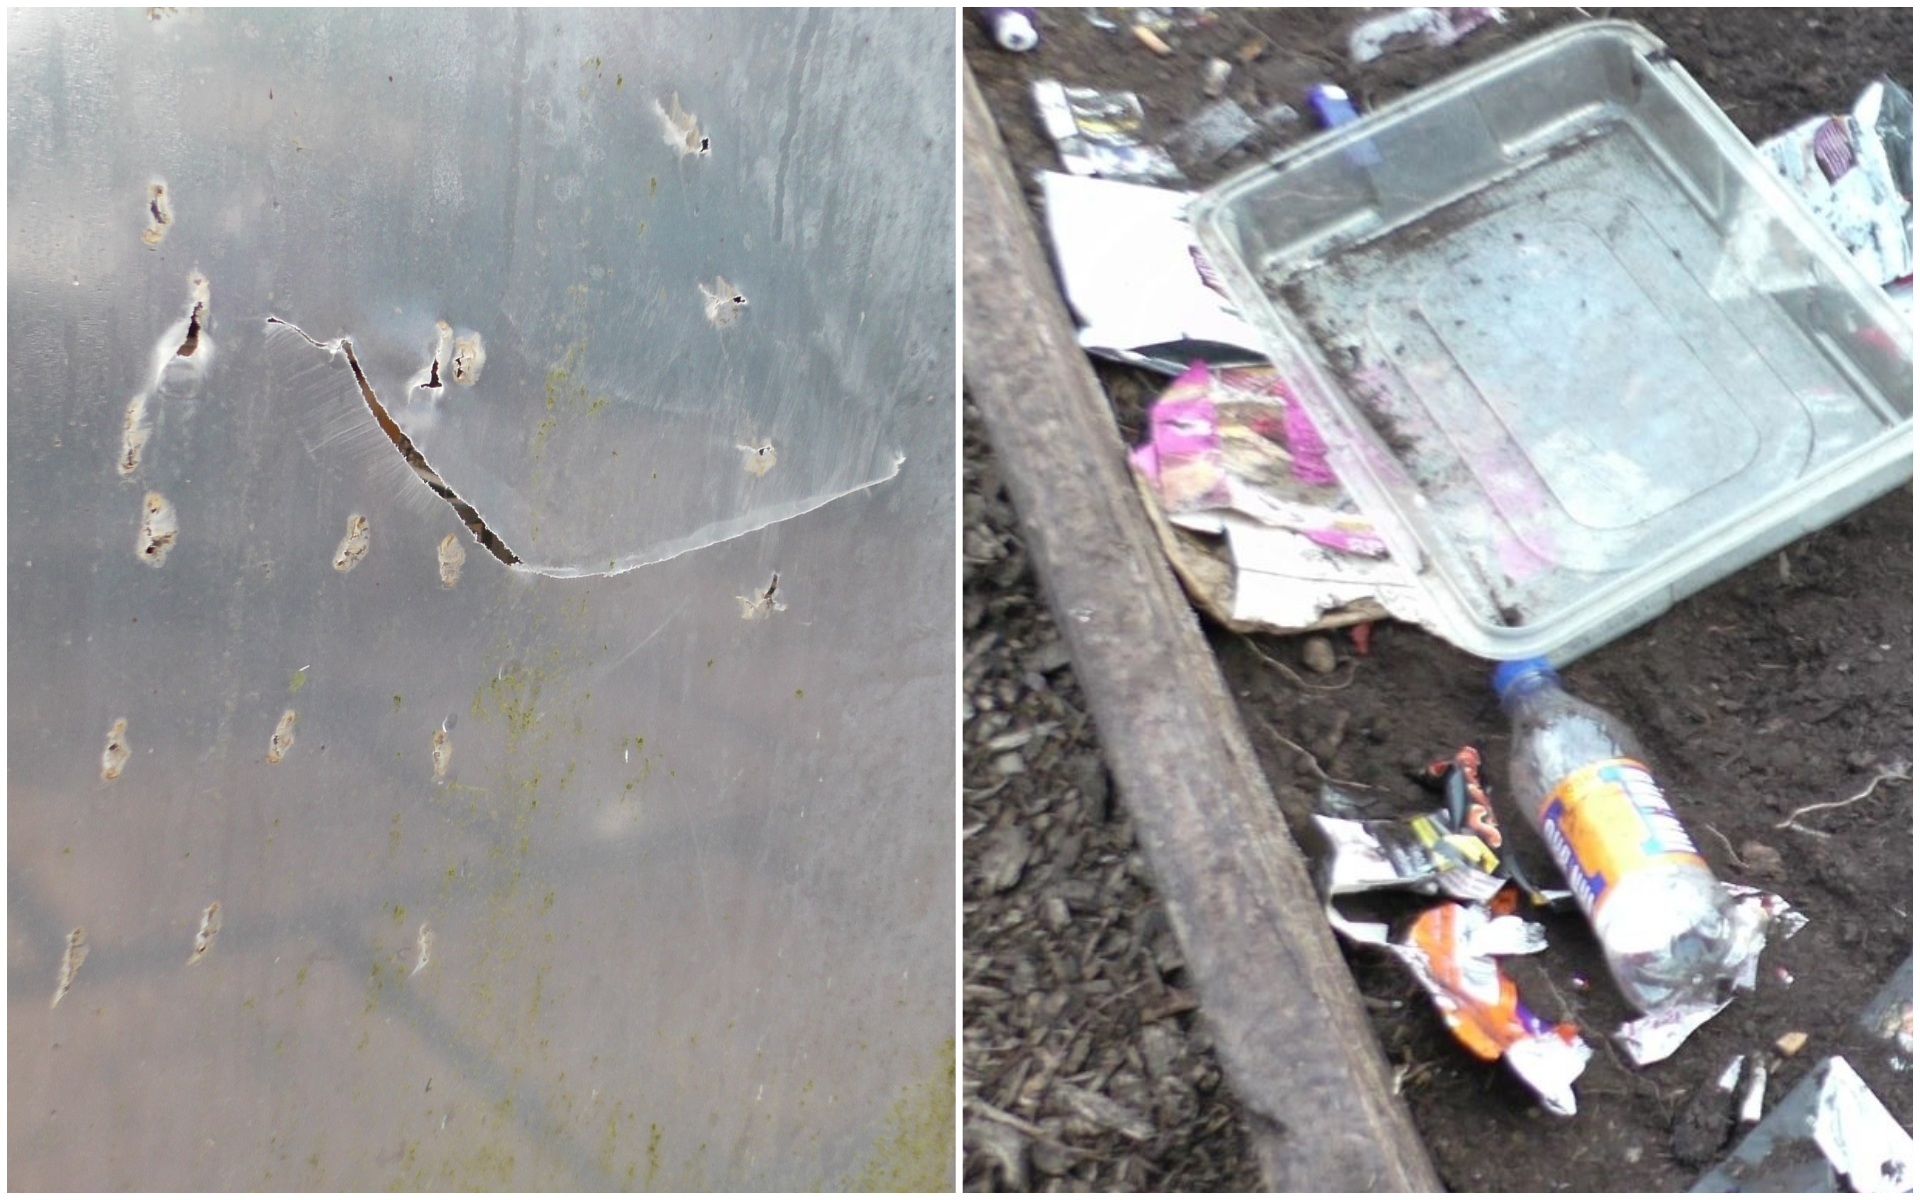 Vandals slashed a polytunnel and dumped rubbish in planters.